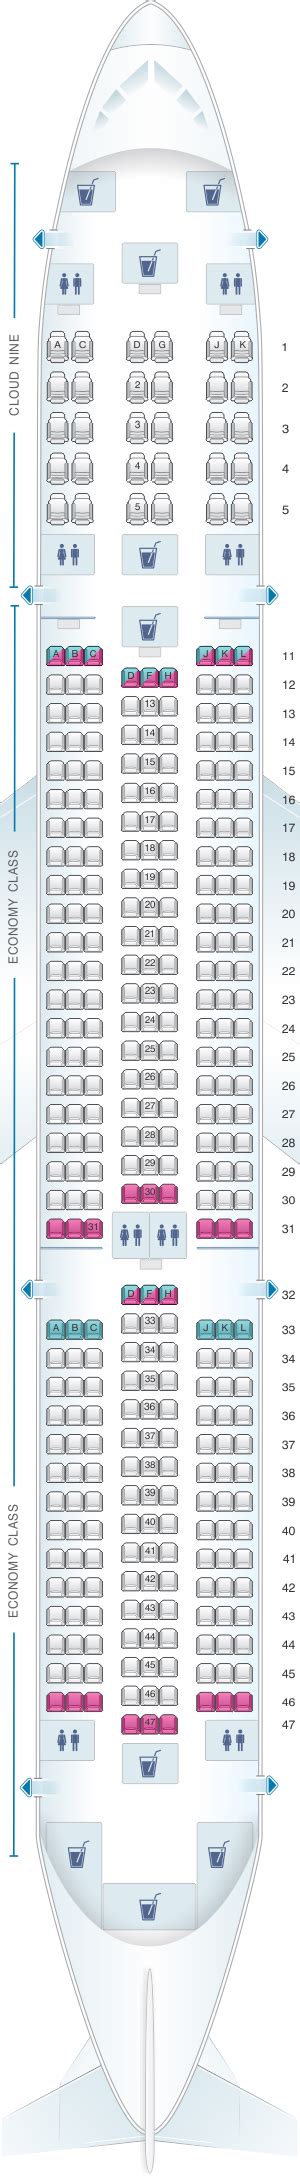 Sas A Seat Map Hot Sex Picture